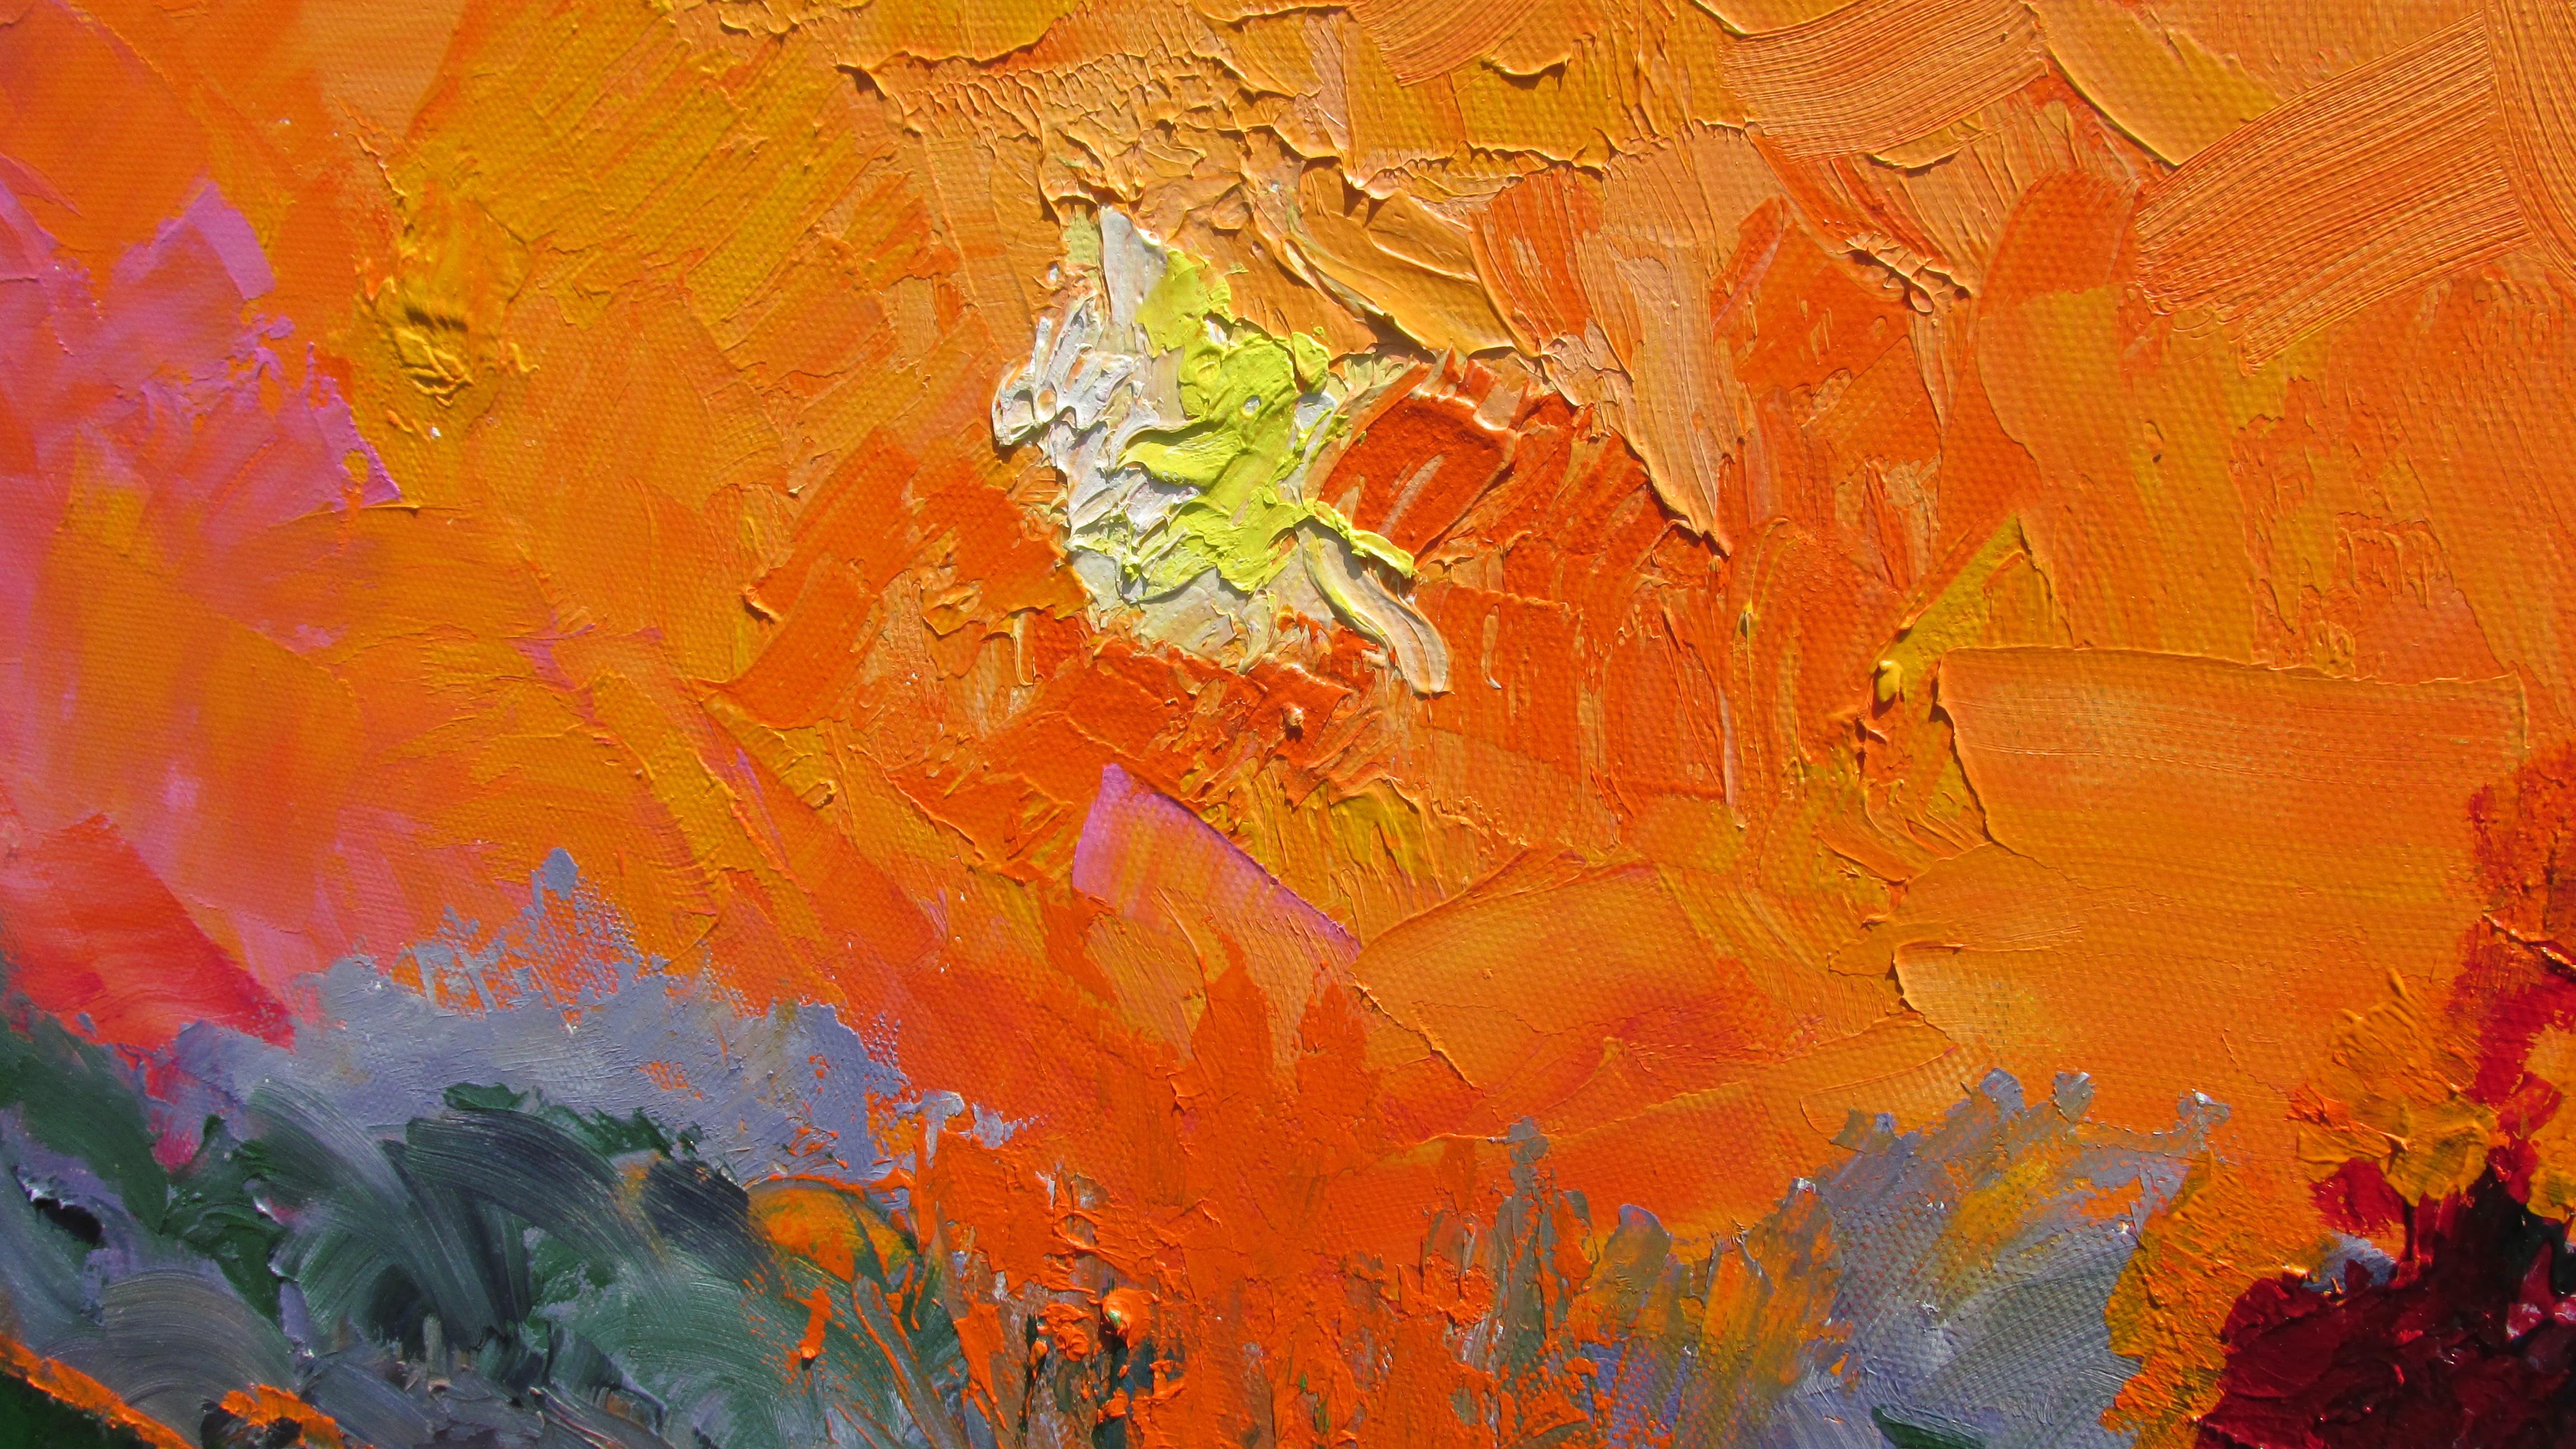 <p>Artist Comments<br />In this piece I wanted to show the last light from a setting sun ricocheting off the trees and the bushes and reflecting in the pond.</p><p>About the Artist<br />Weldon Ball creates bright, abstract landscapes that oftentimes